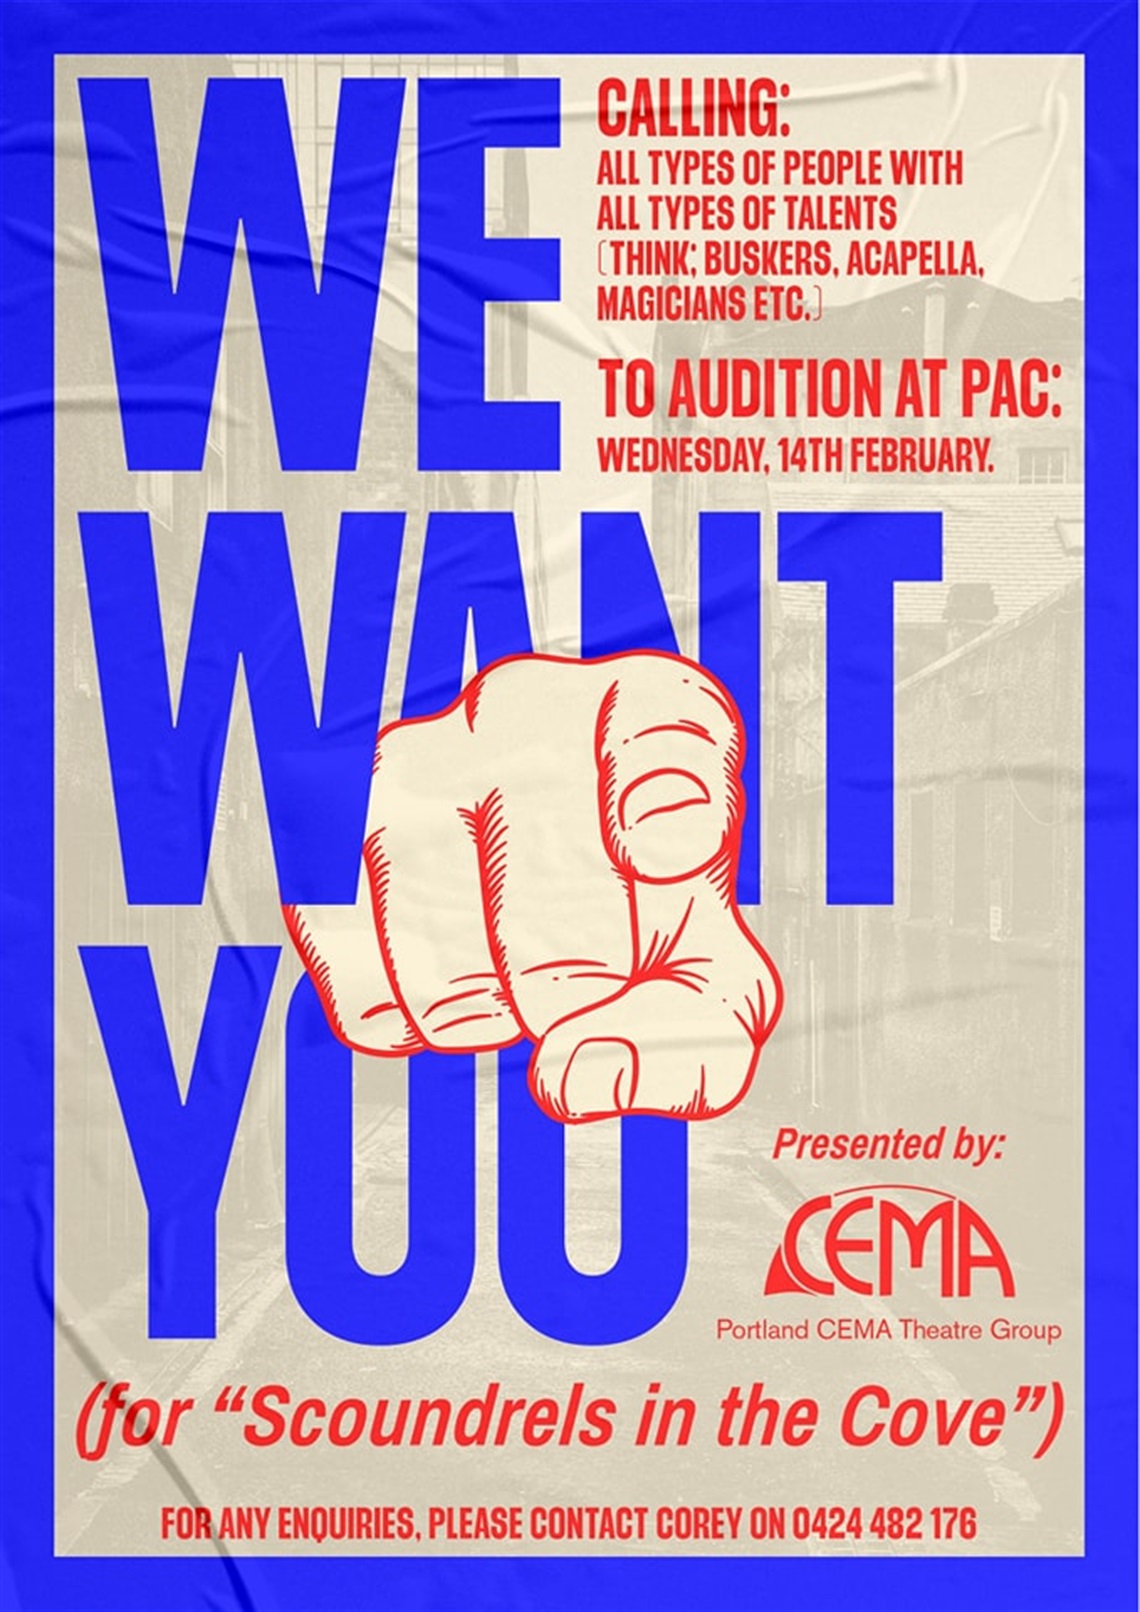 CEMA Audition Poster